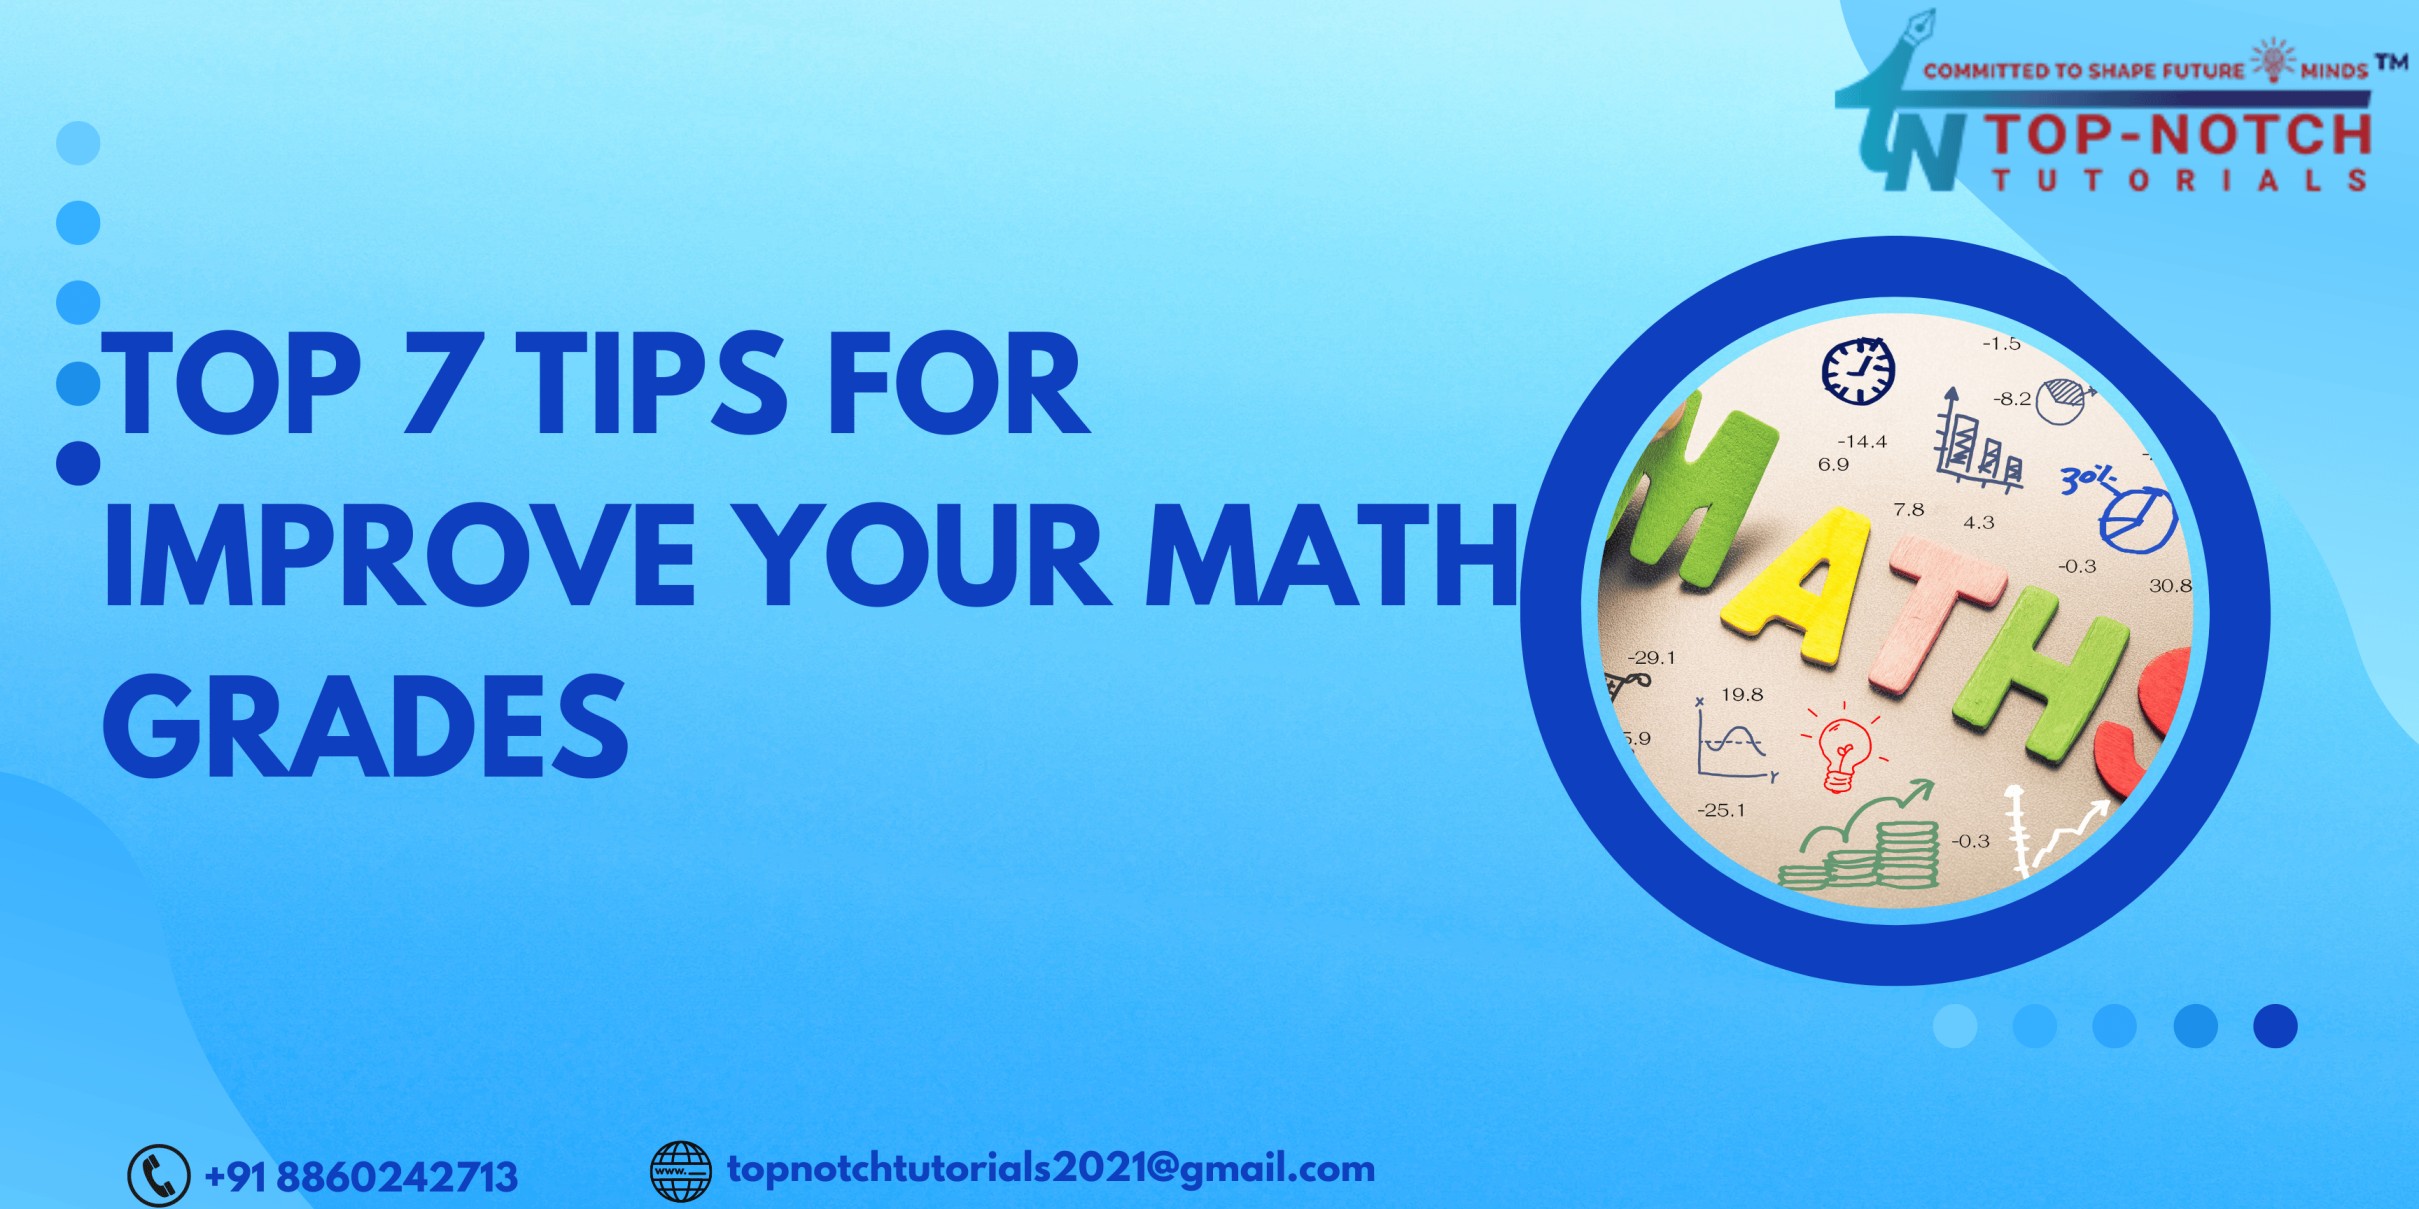 Top 7 Tips for Improve your Math Grades